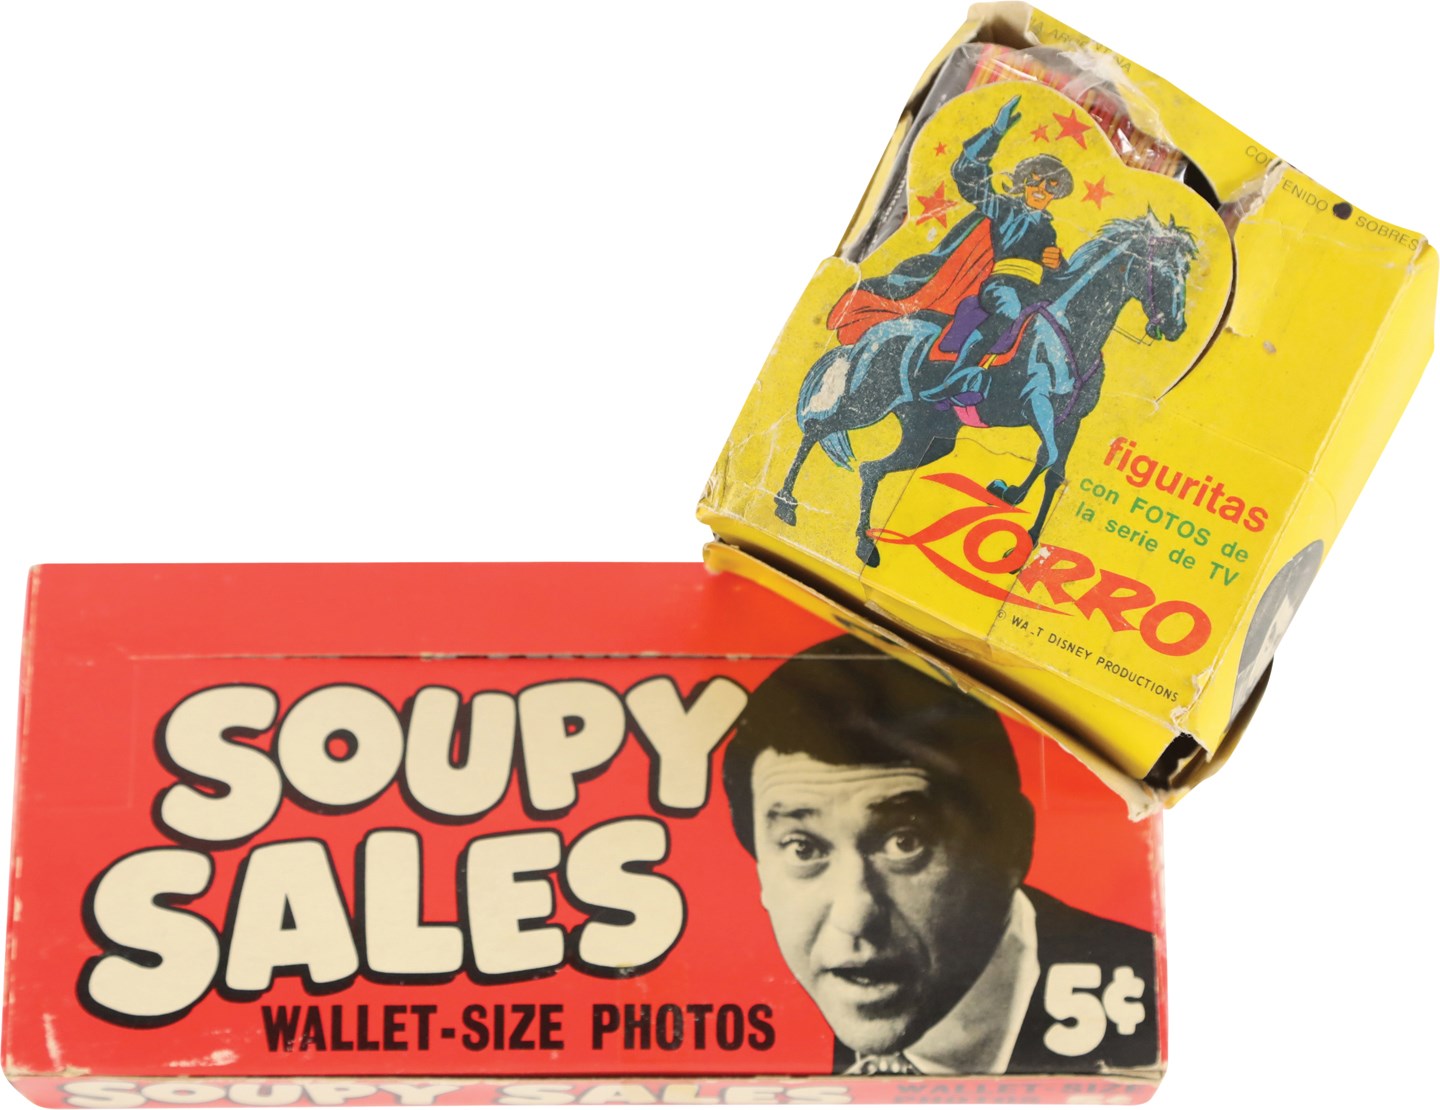 Non-Sports Cards - 1958-1965 Topps Zorro & Soupy Sales Wax Pack Collection w/Original Display Boxes